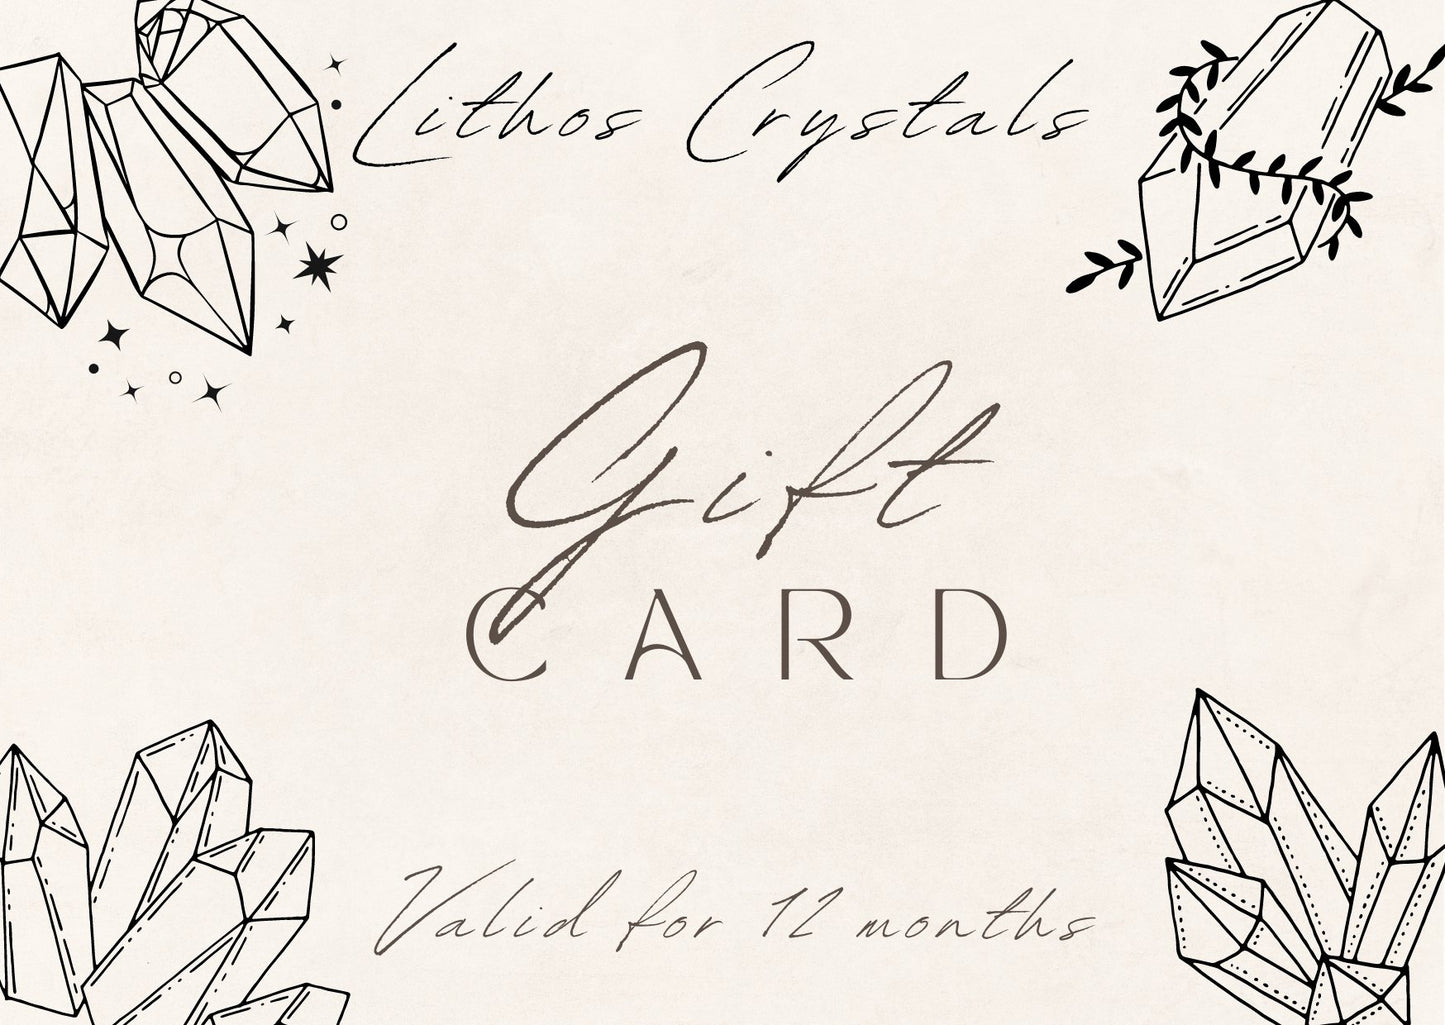 GIFT CARD - Lithos Crystals